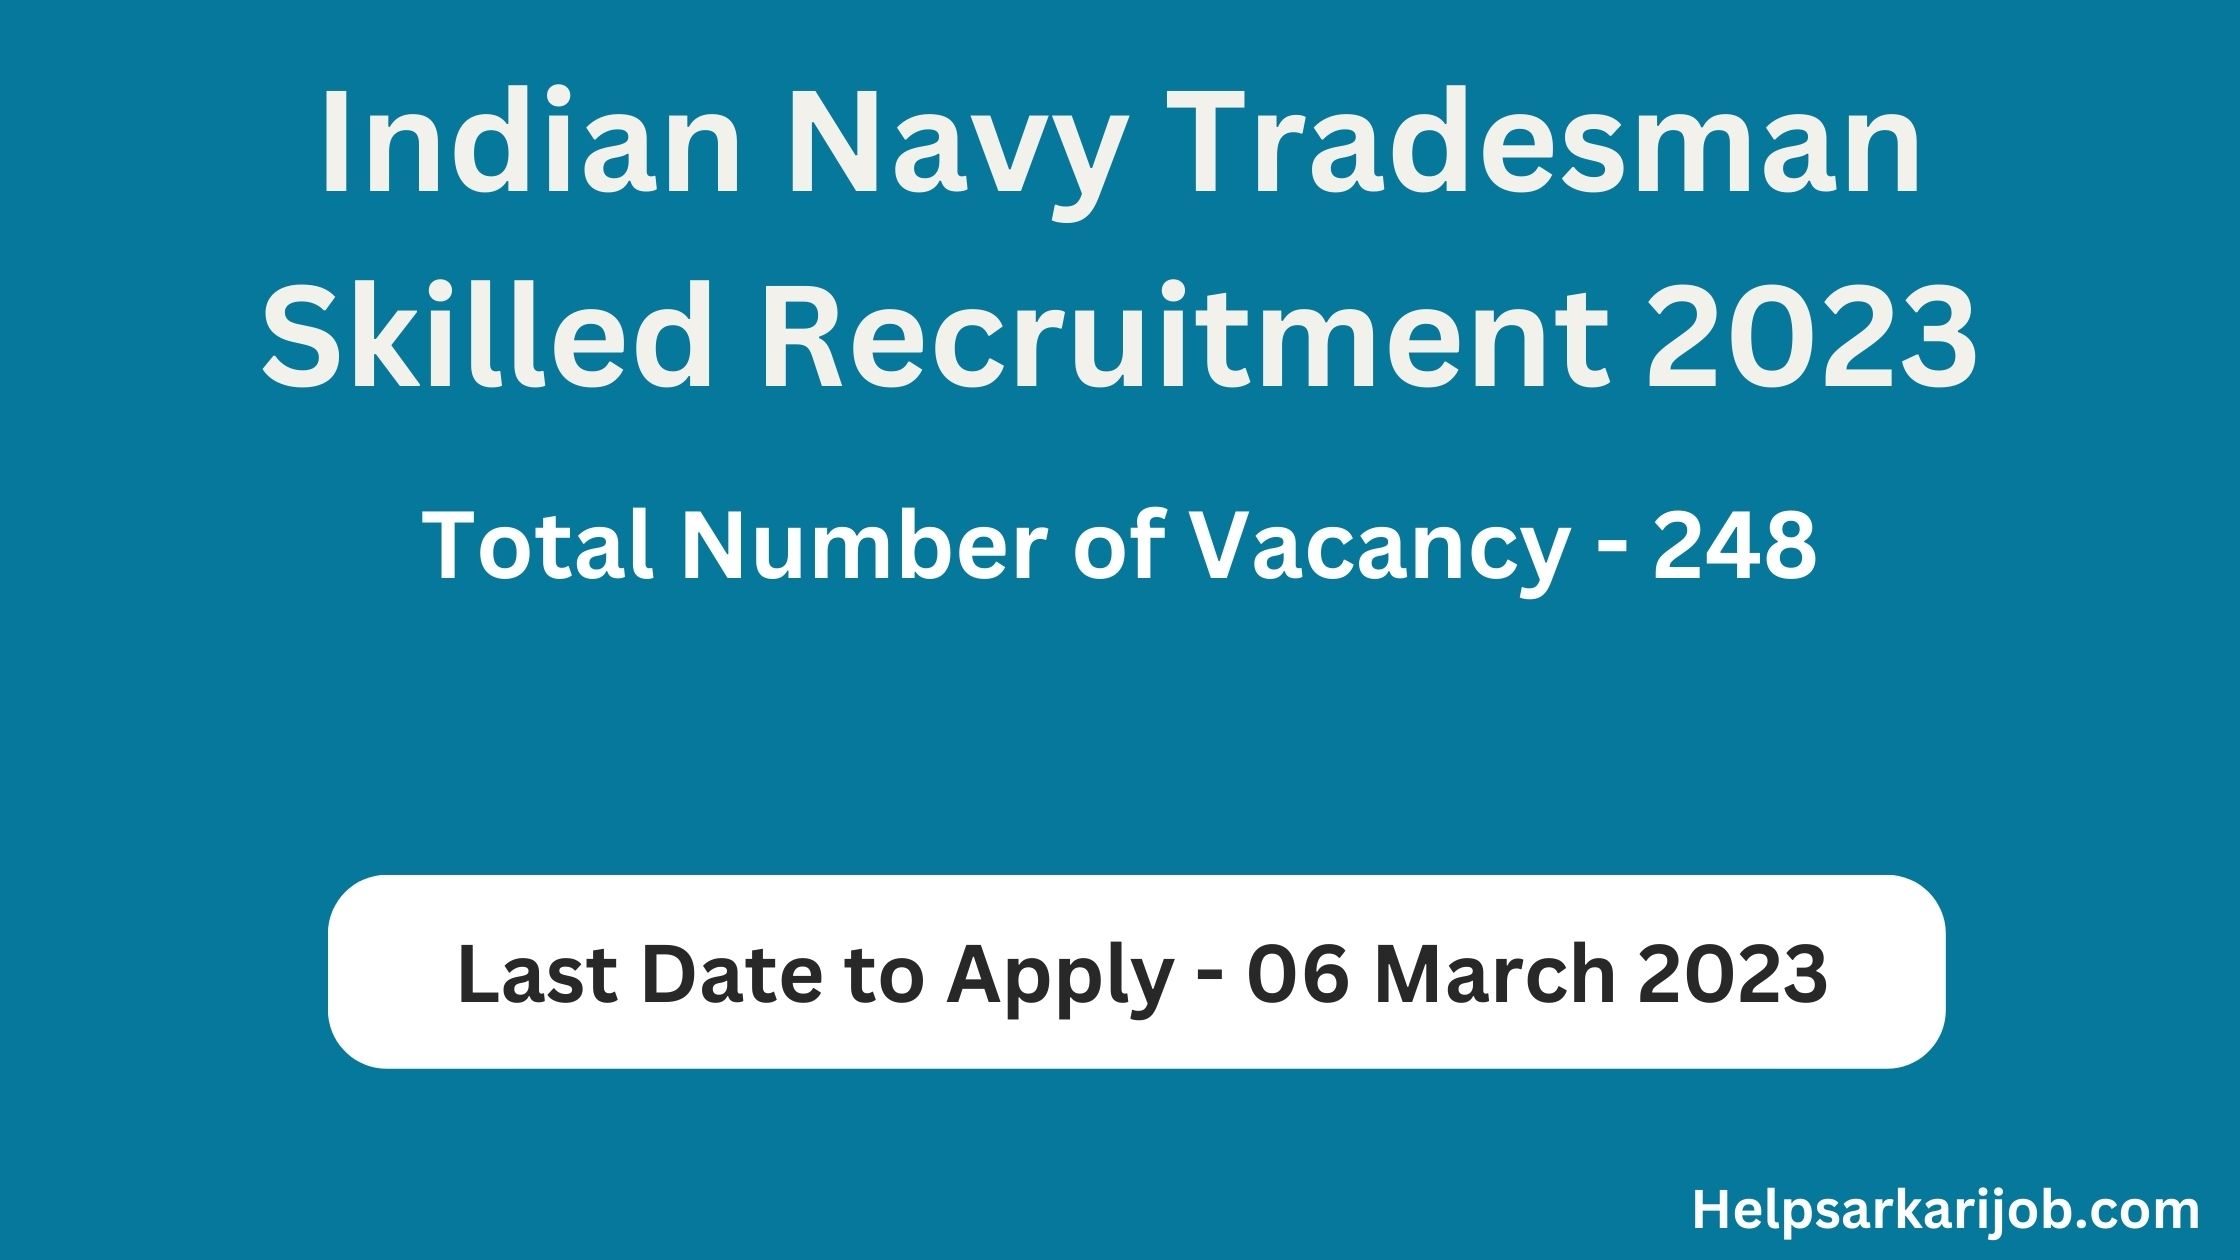 Indian Navy Tradesman Skilled Recruitment 2023 last date to apply and vacancy details